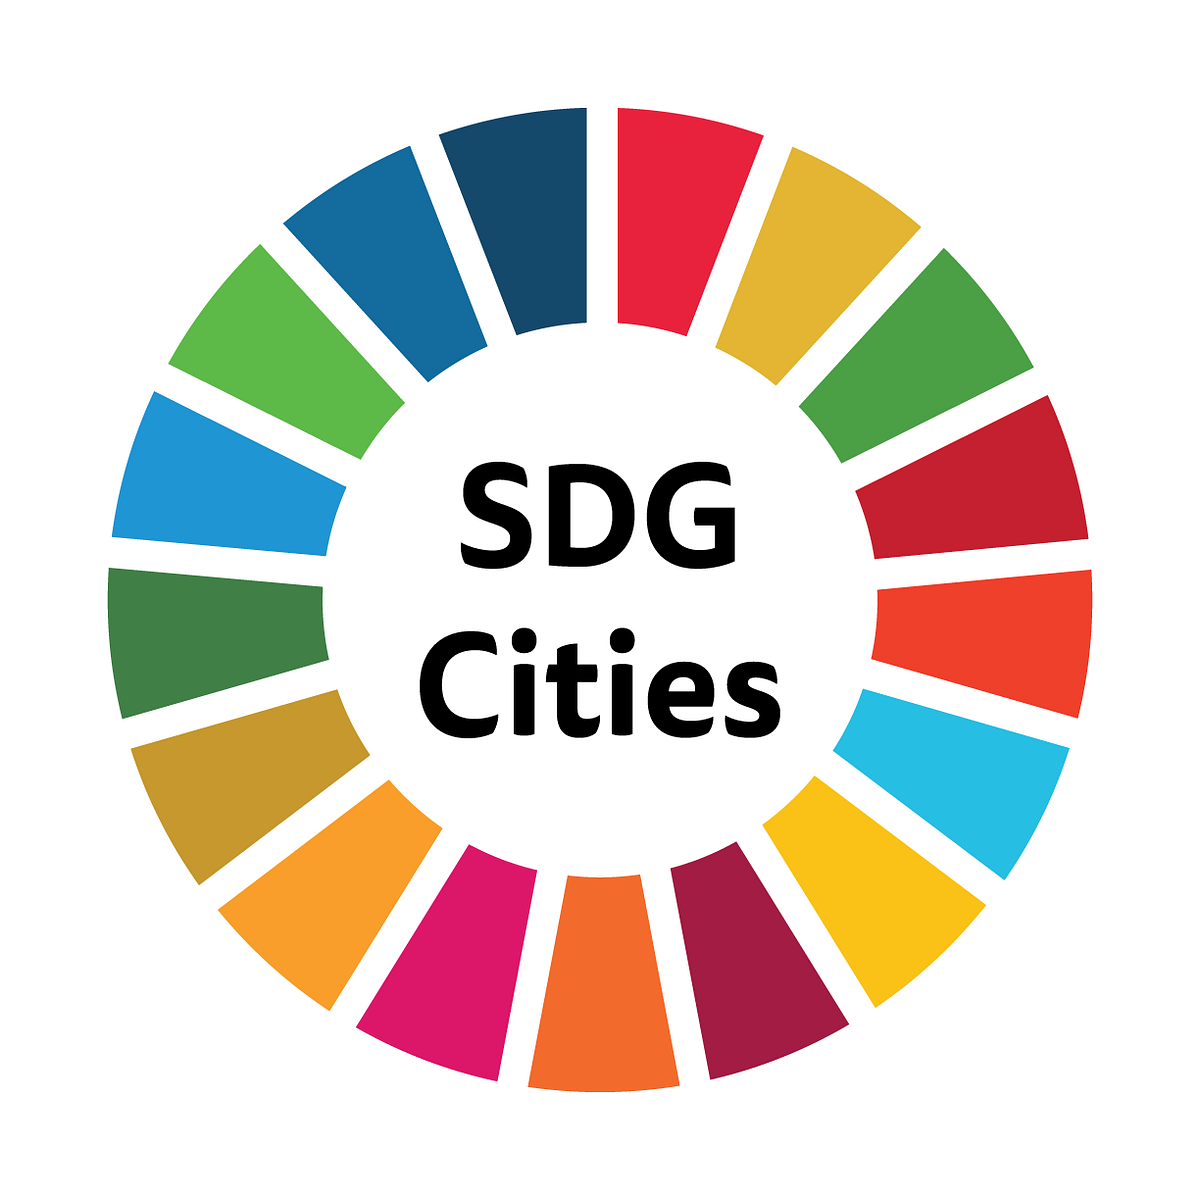 Sdgs Logo Download / SDGs in Action - Download the logo in png and